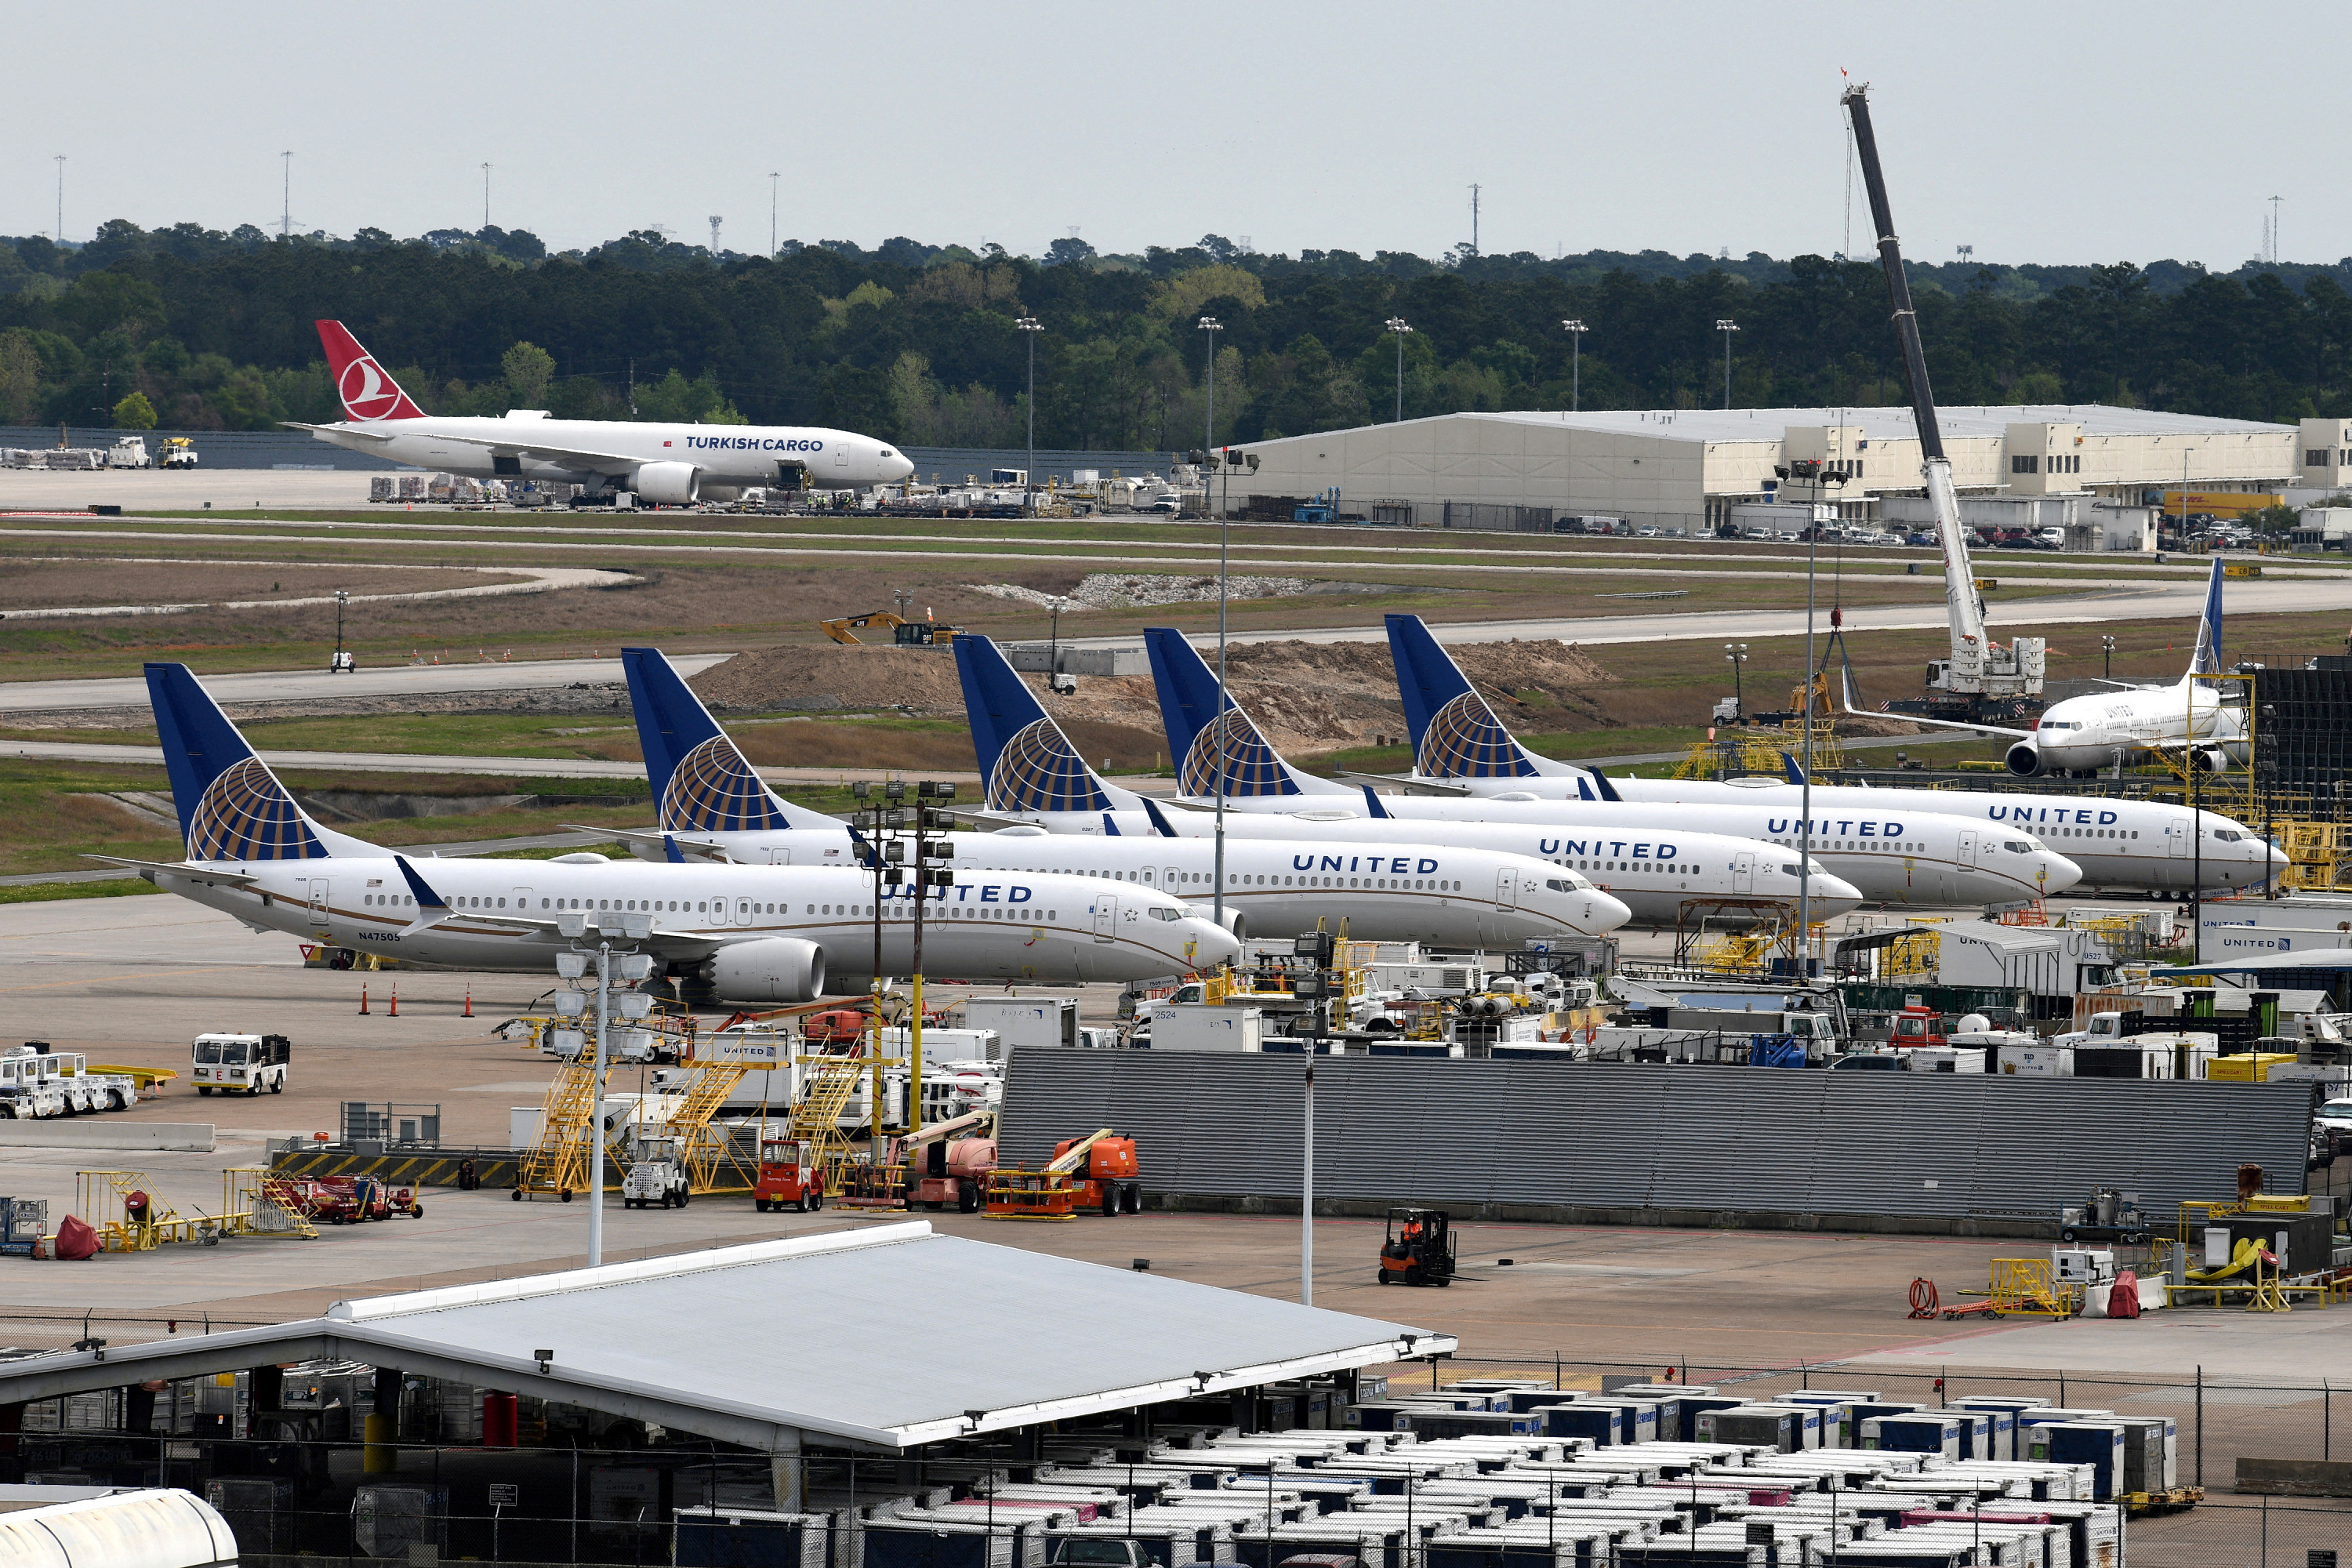 New incident with a Boeing: a United Airlines 737 landed with a missing exterior panel